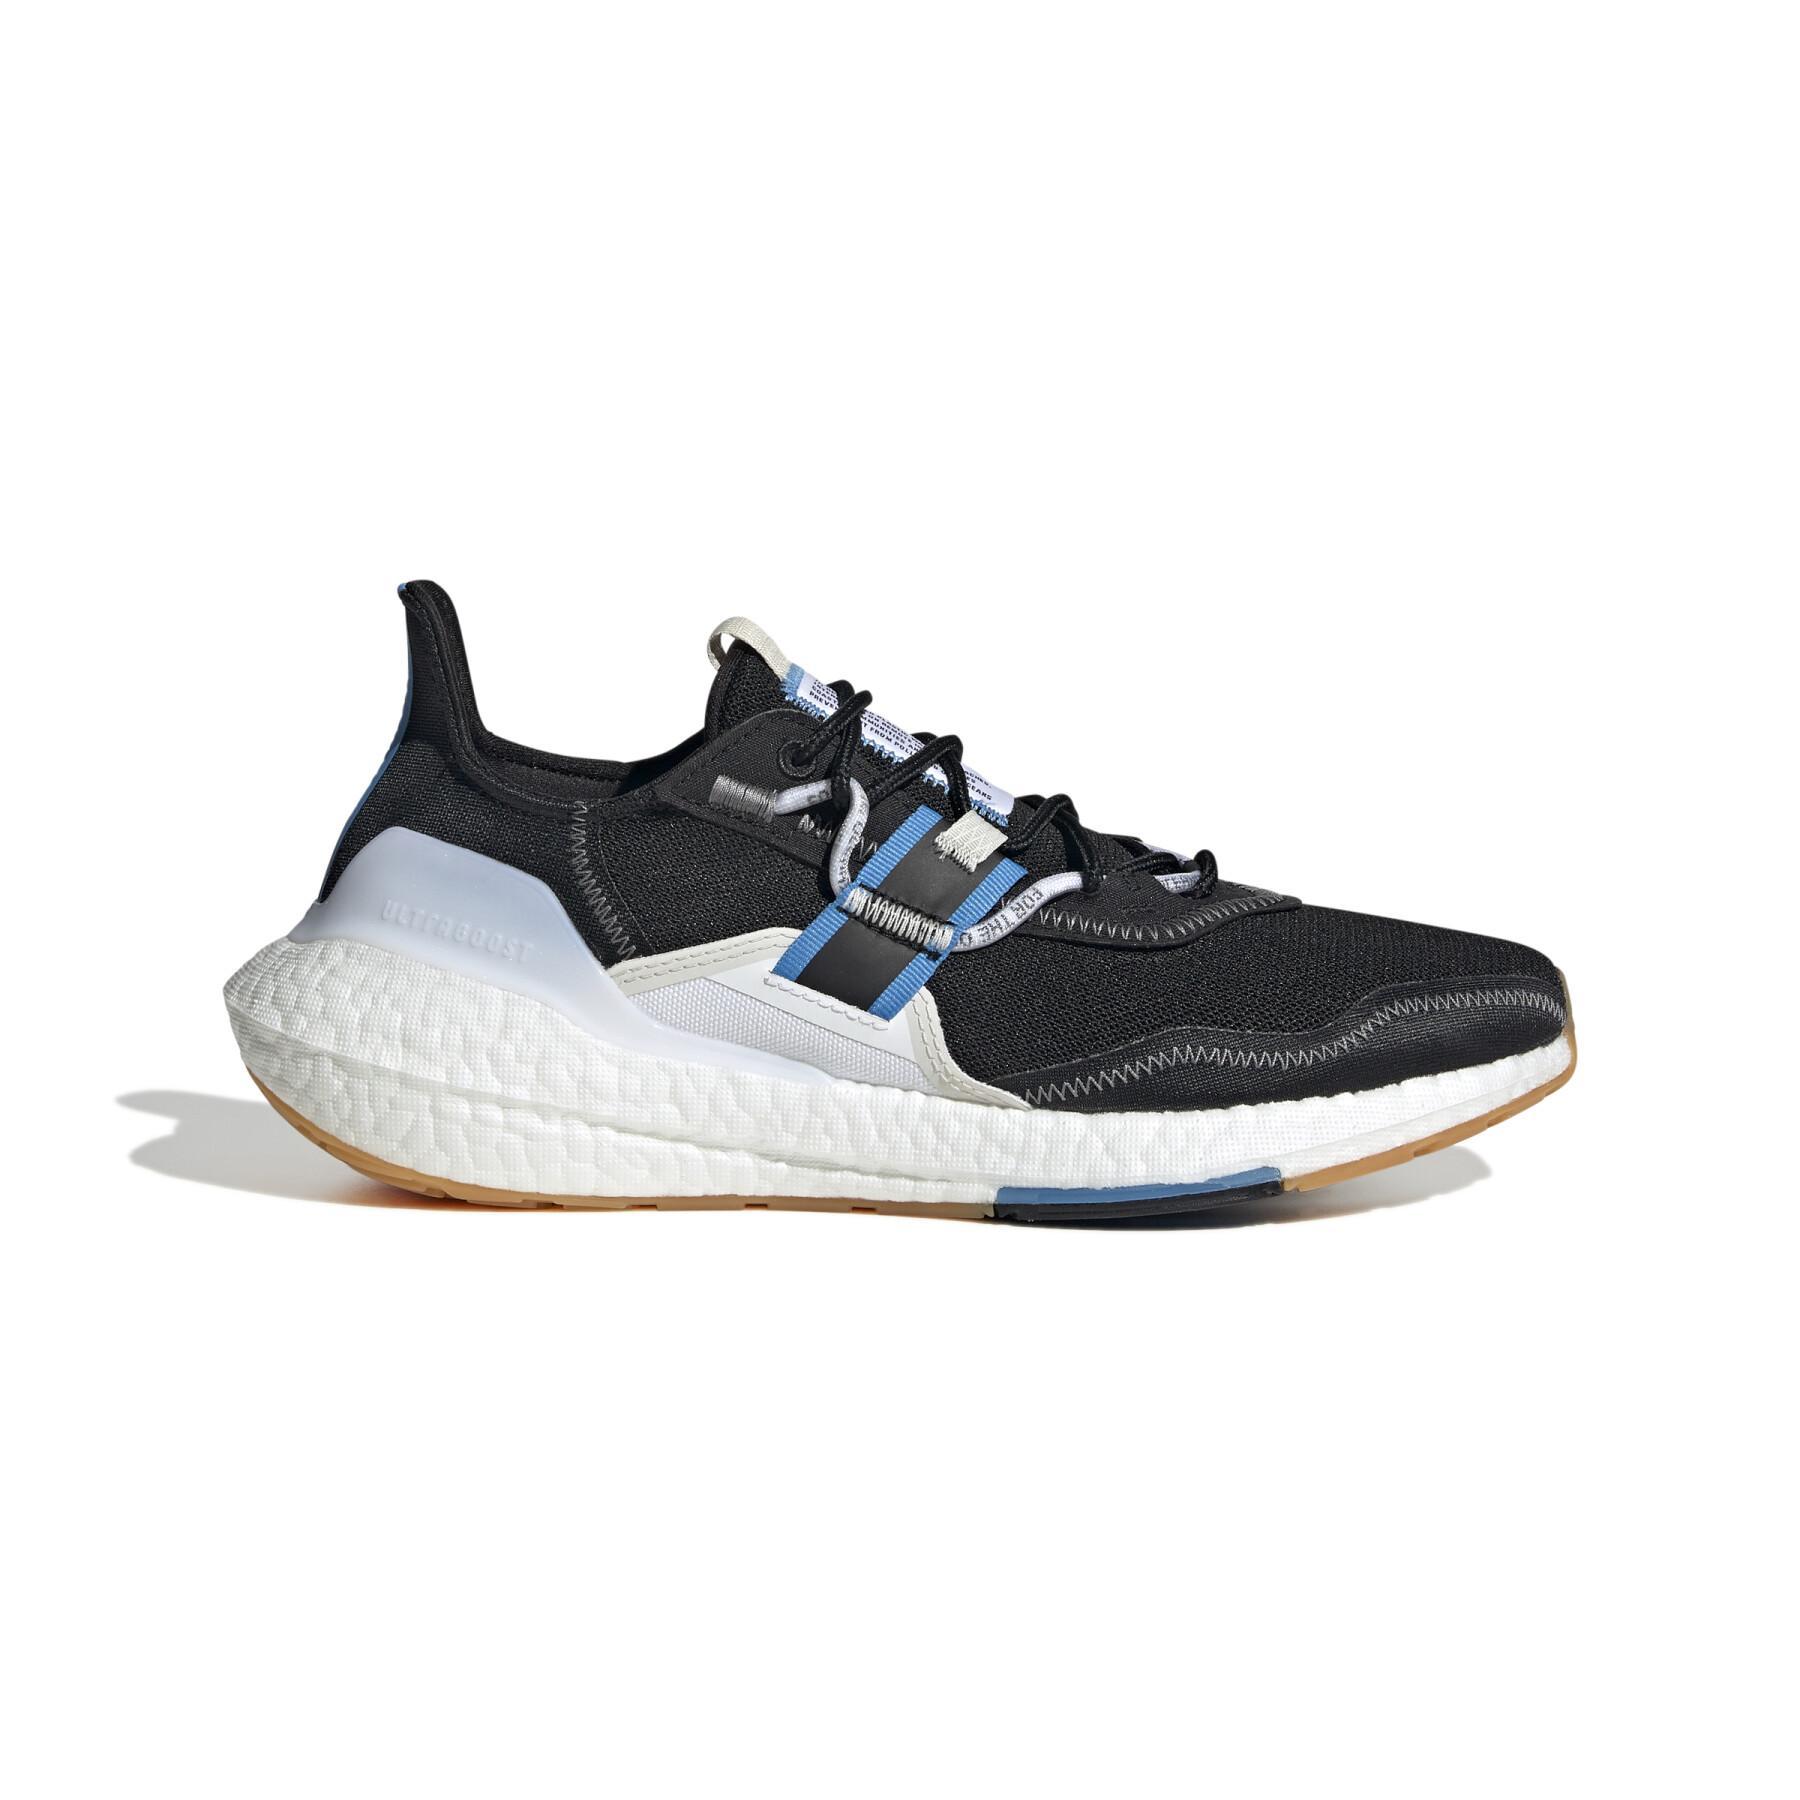 Running shoes adidas Parley x Ultraboost 22